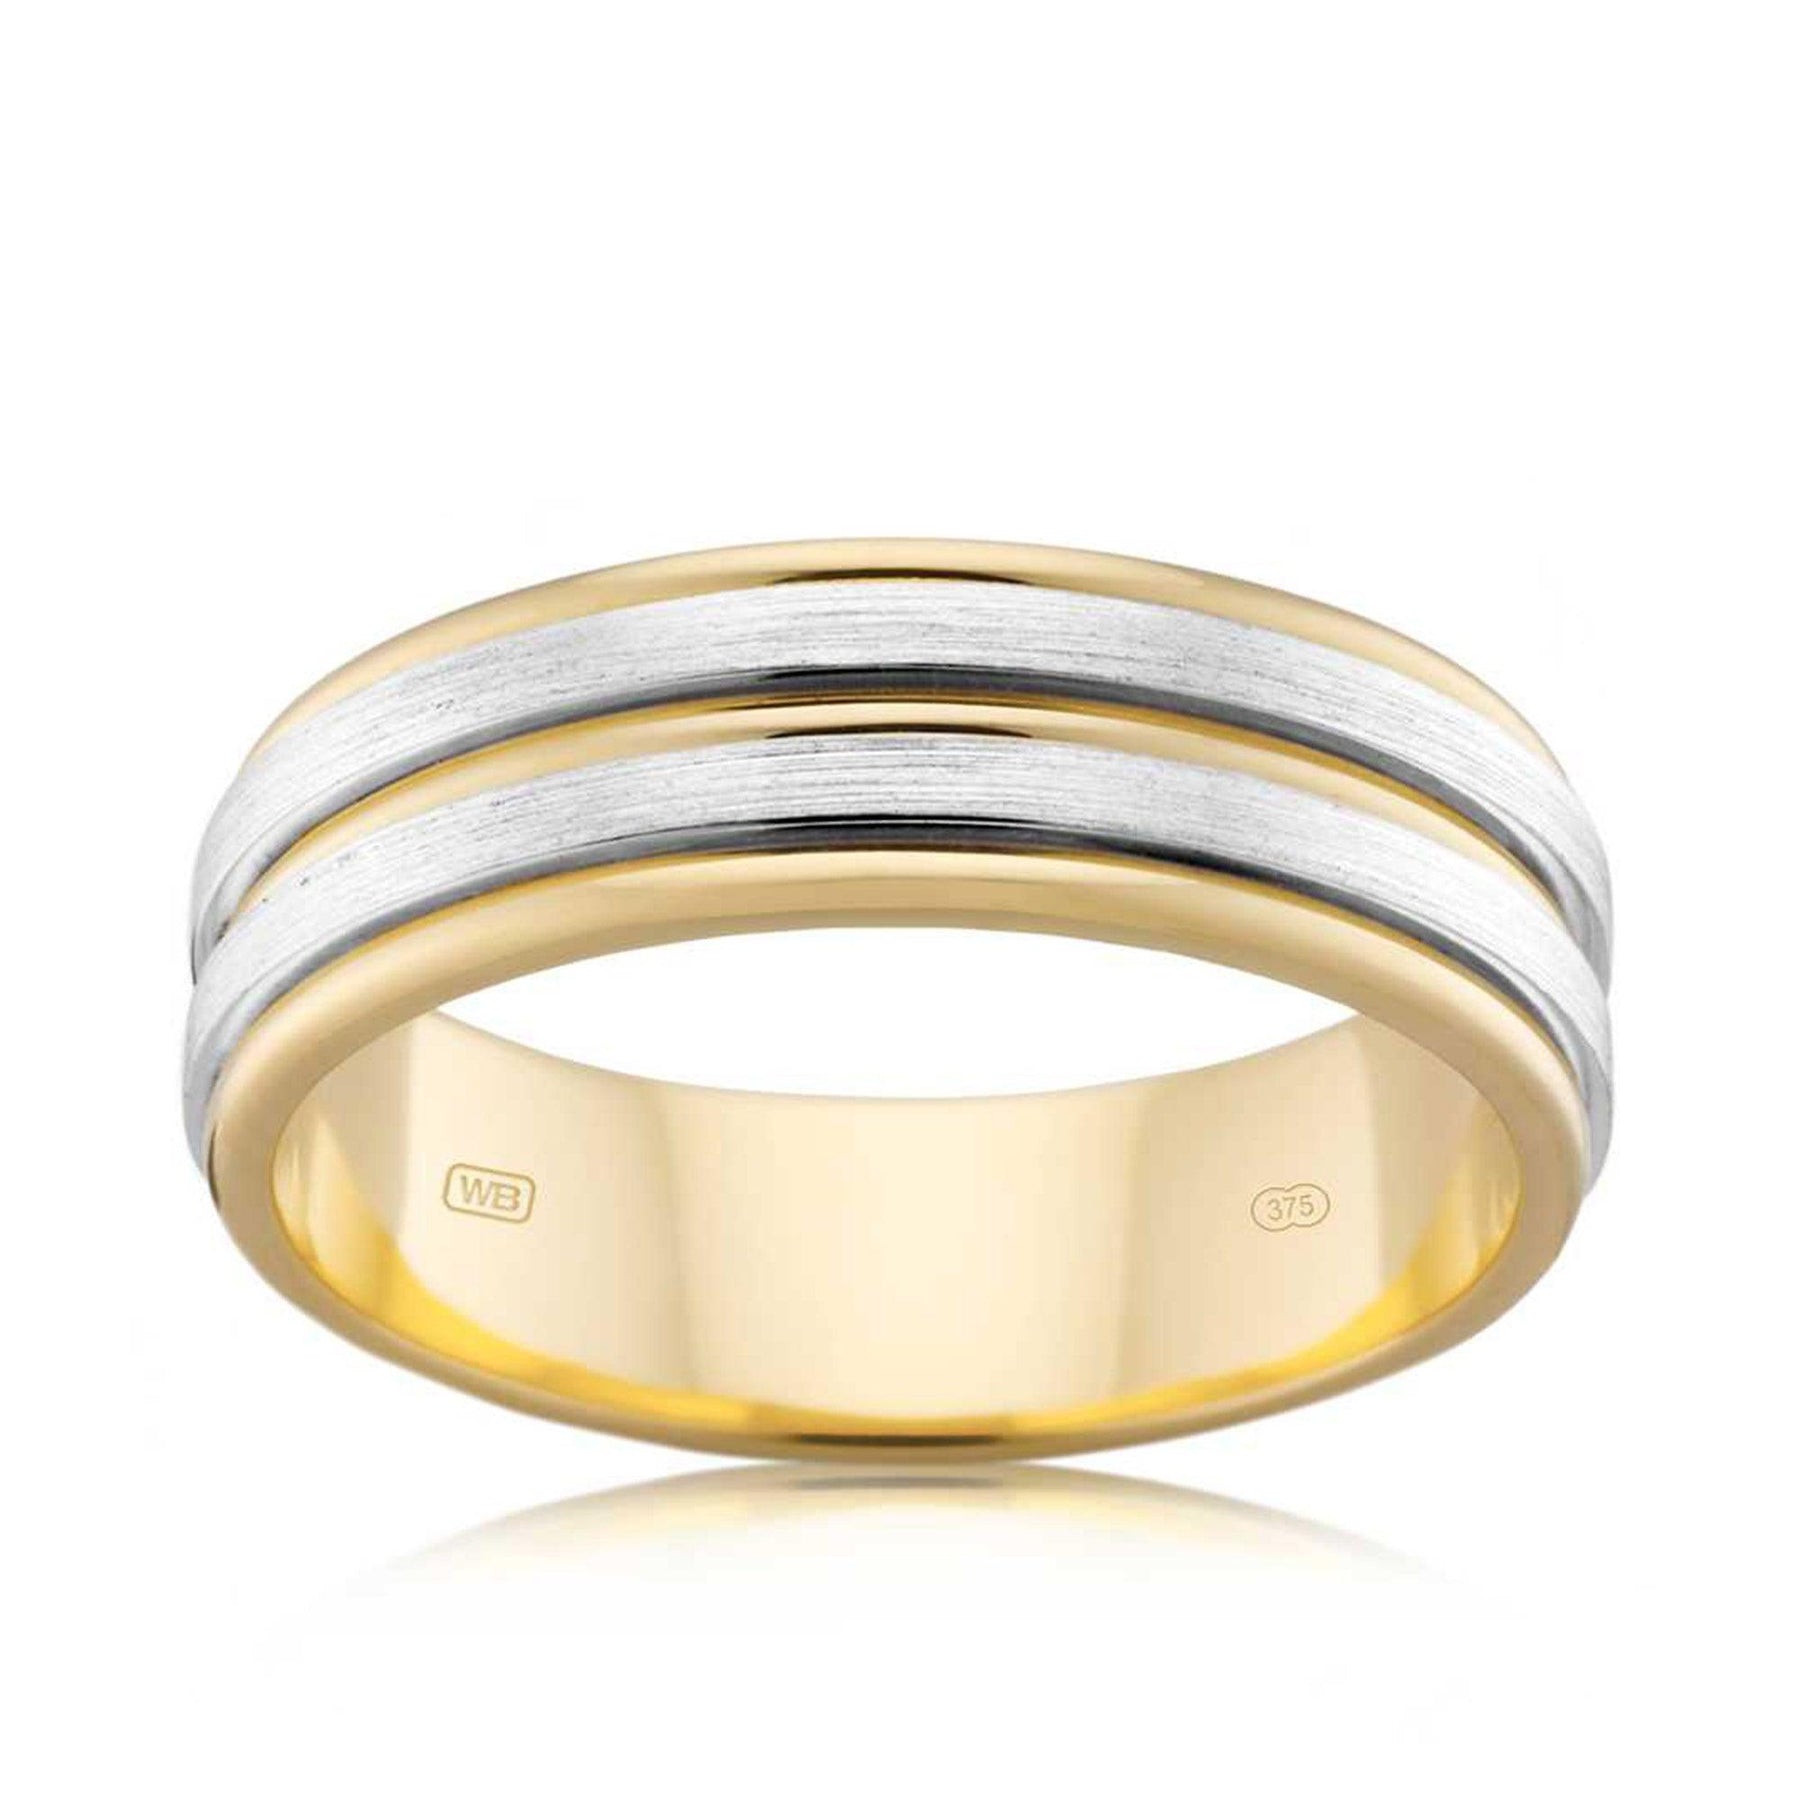 Men's Wedding Band in 9ct Yellow and White Gold - Wallace Bishop